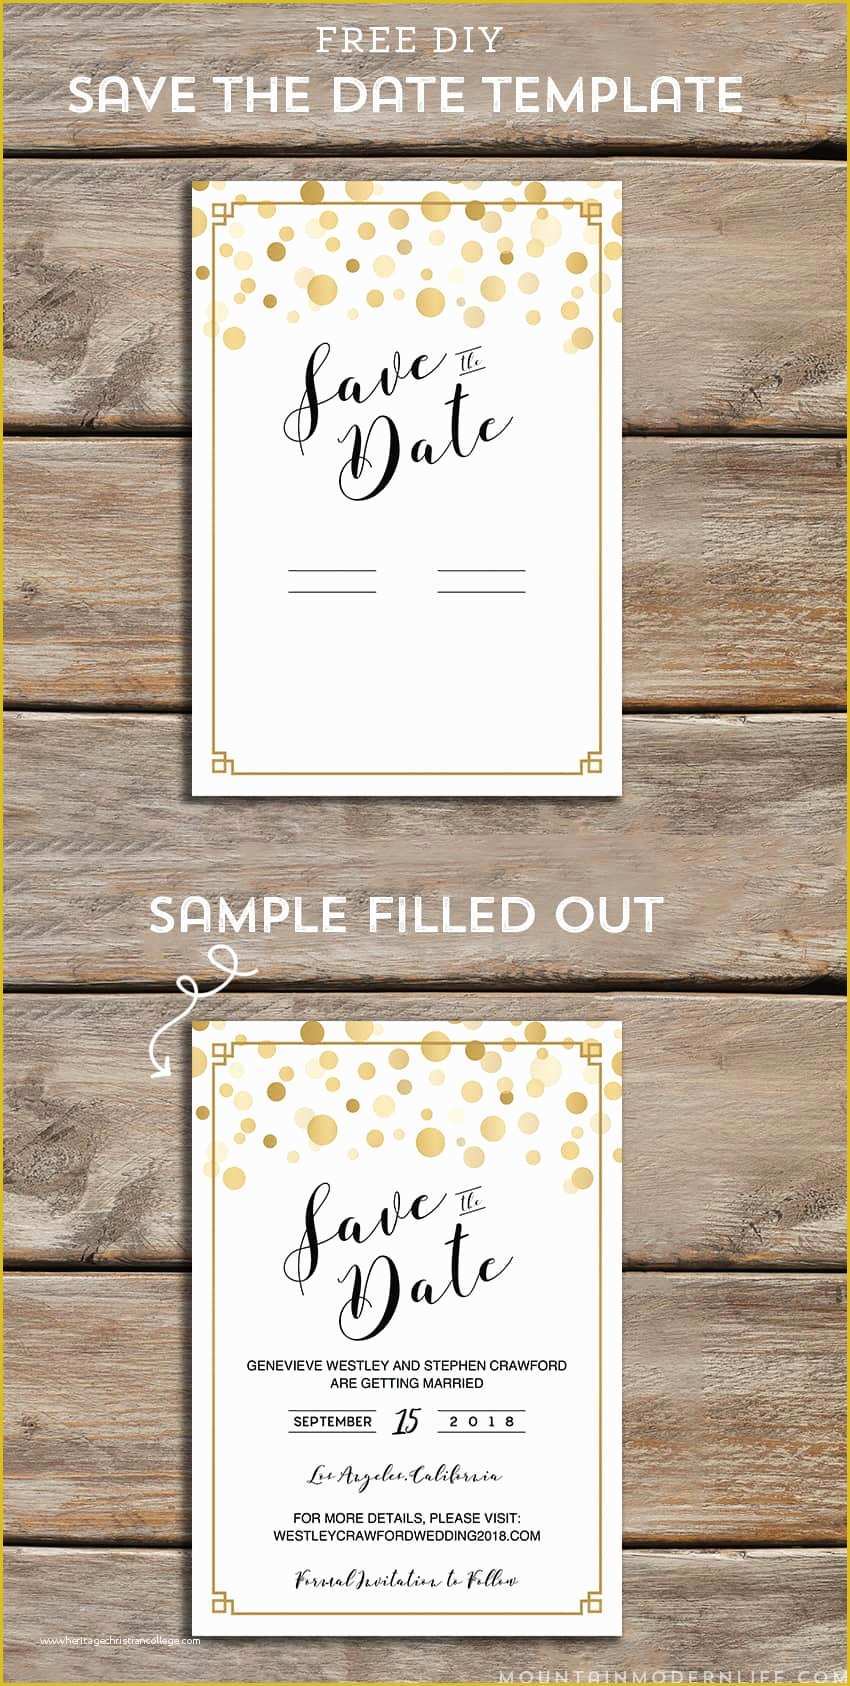 Free Printable Save the Date Templates Of Modern Diy Save the Date Free Printable